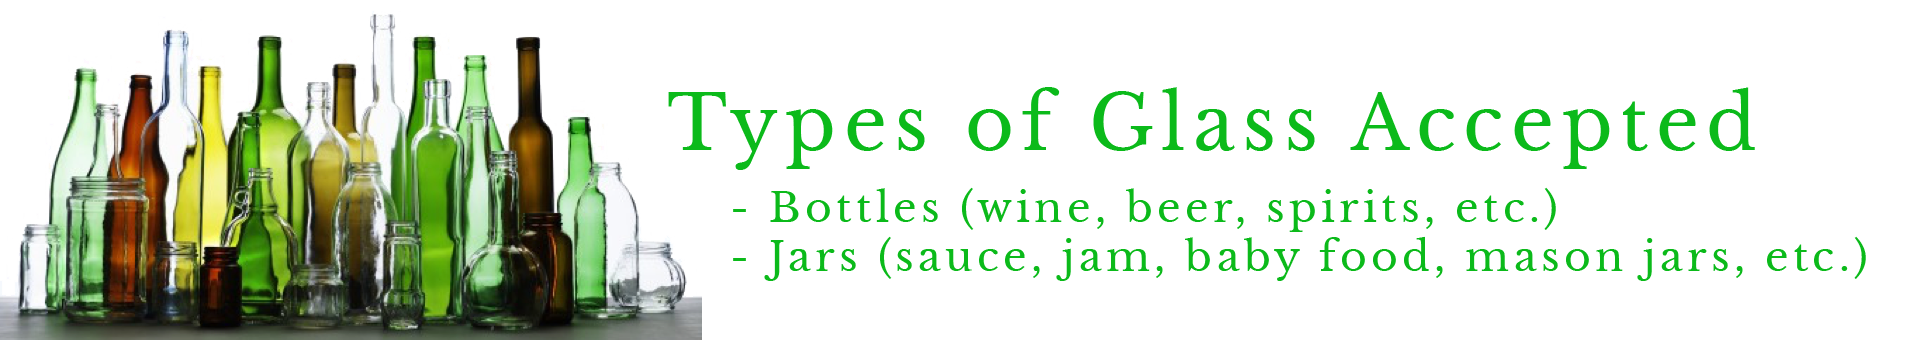 Types of glass accepted include Bottles: wine, beer, spirtis etc.) and Jars (sauce, jam, baby food, mason jars etc.)